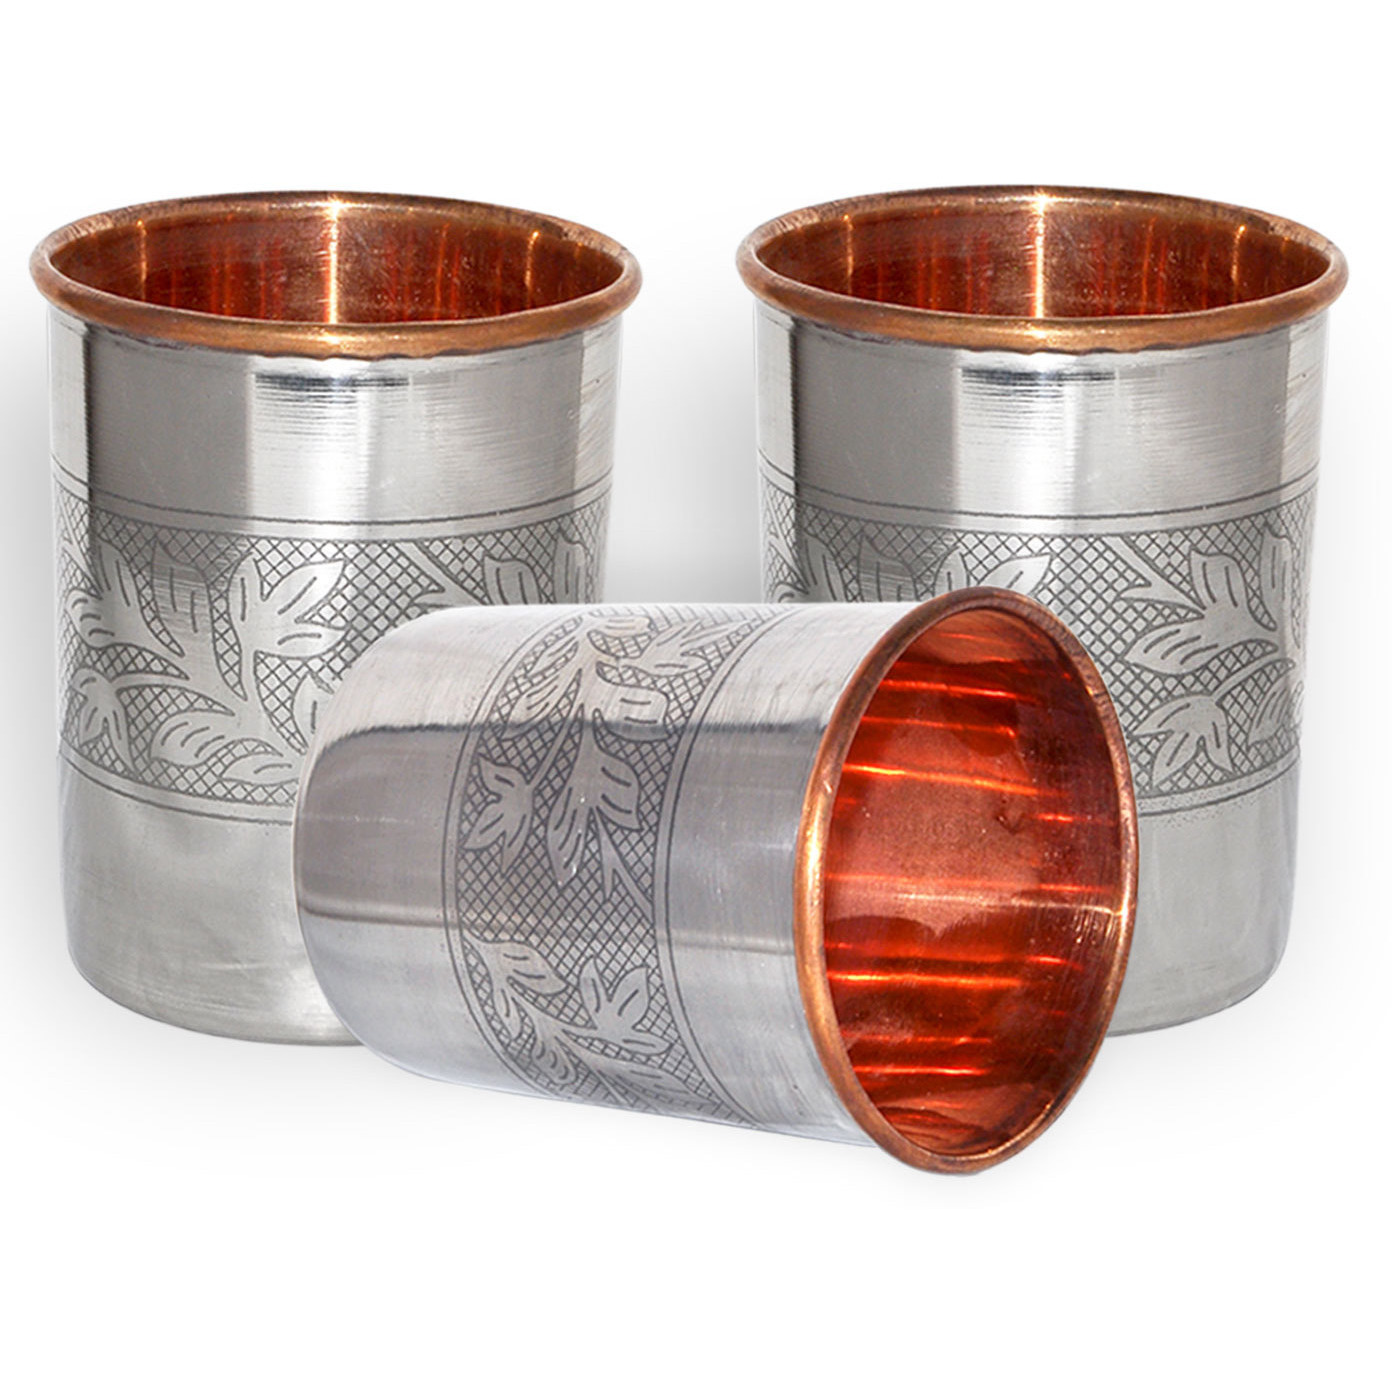 Set of 3 - Prisha India Craft B. Handmade Water Glass Copper Tumbler  Inside Stainless Steel | Traveller's Copper Cup